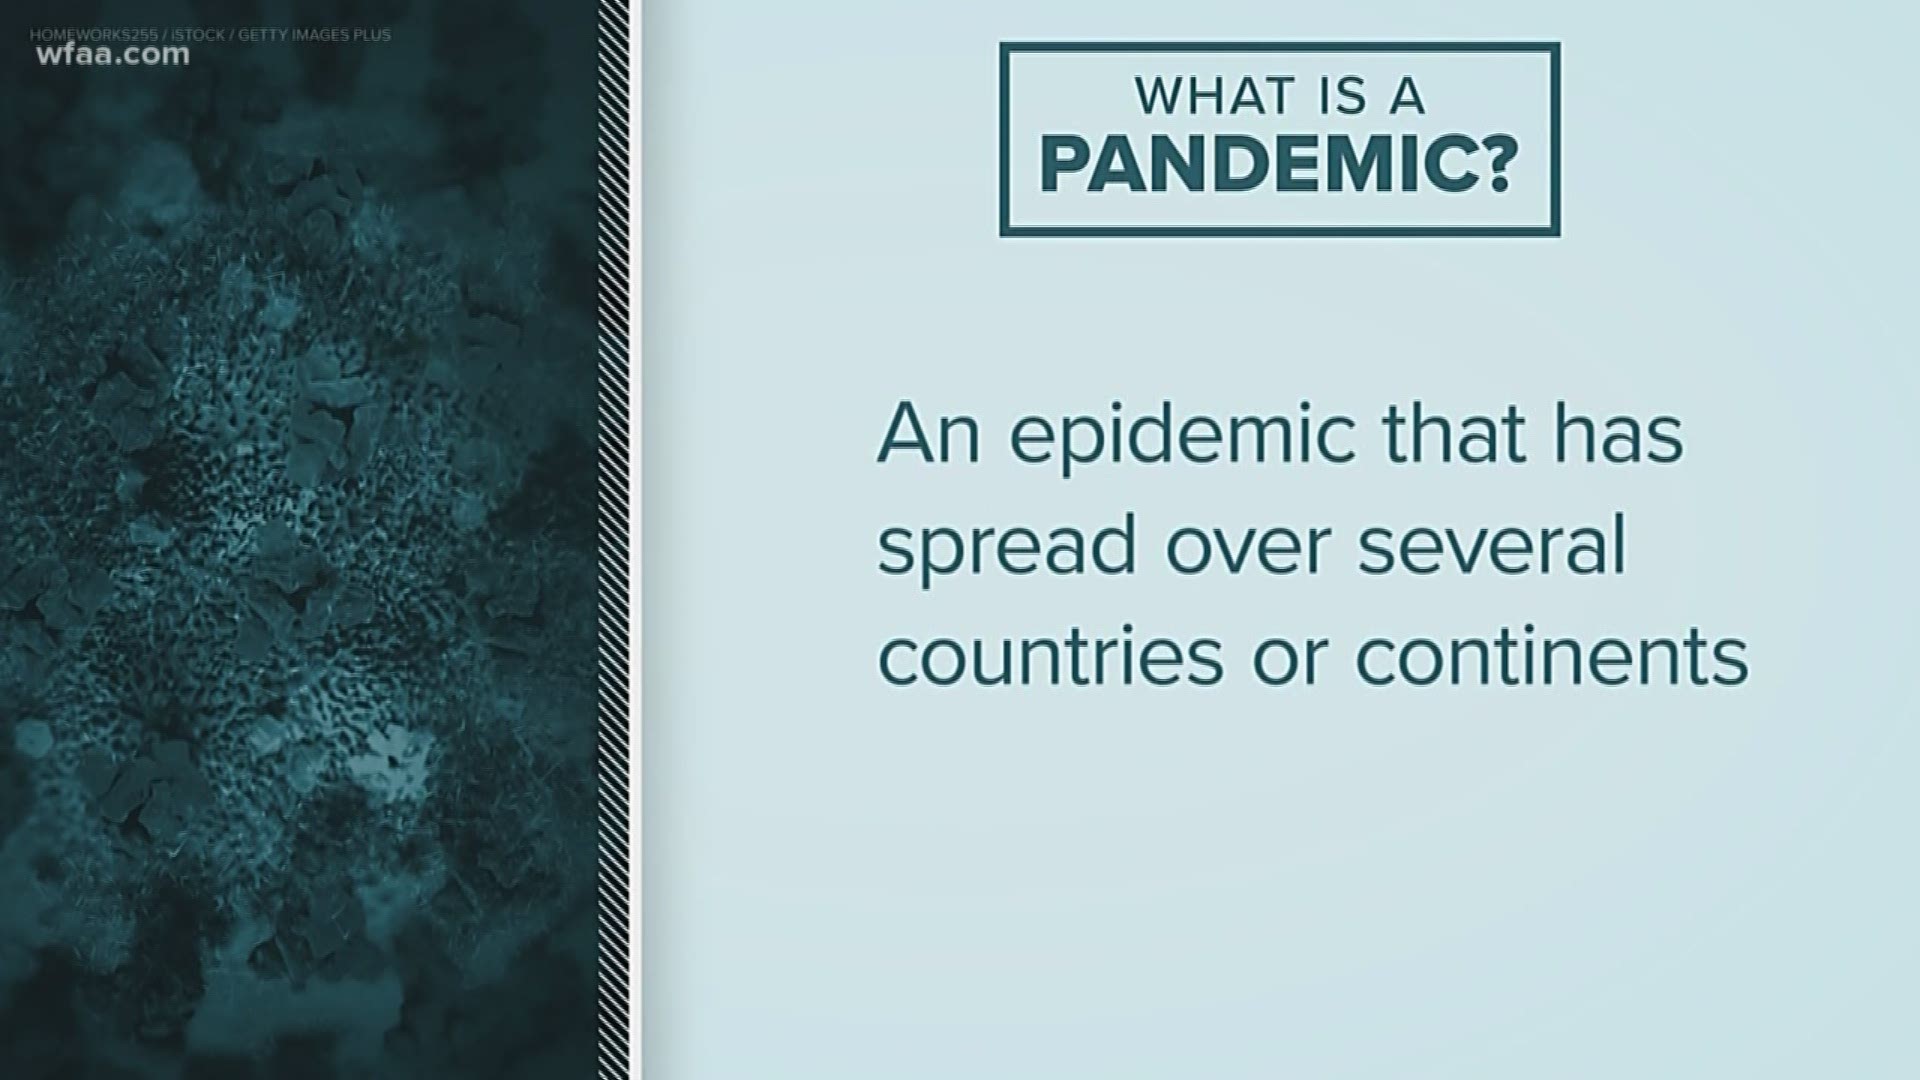 Sonia Azad breaks down the meaning of the upgrade to a pandemic, as well as other commonly used terms being used during the COVID-19 outbreak.